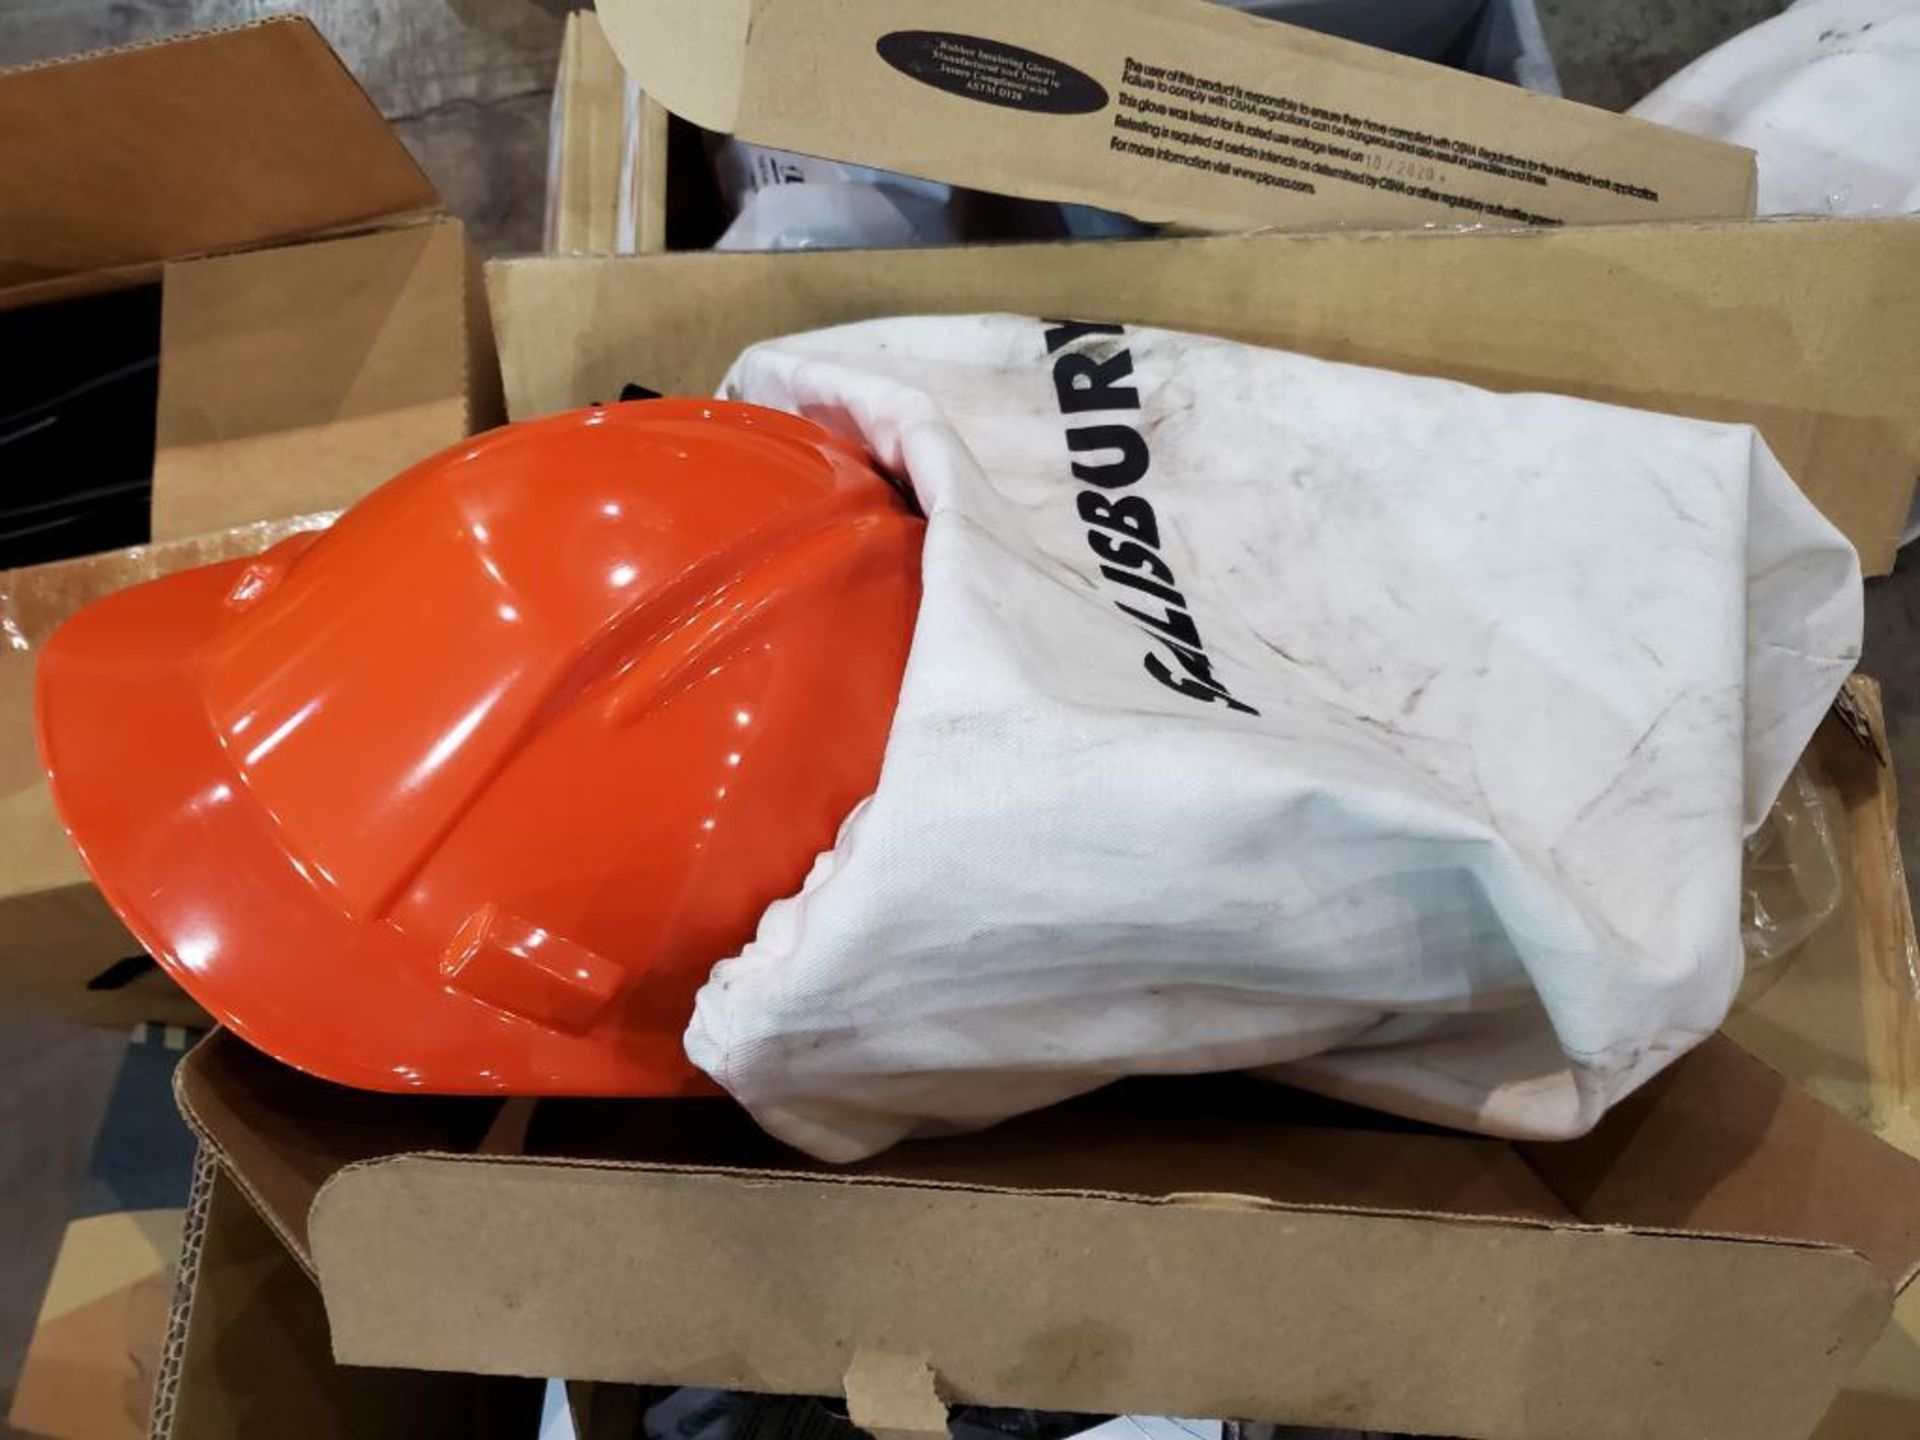 PALLET OF (2) DEFIBRILLATORS, SAFETY GLASS, GLOVES, HARD HATS W/ SHIELDS, & MORE - Image 8 of 8